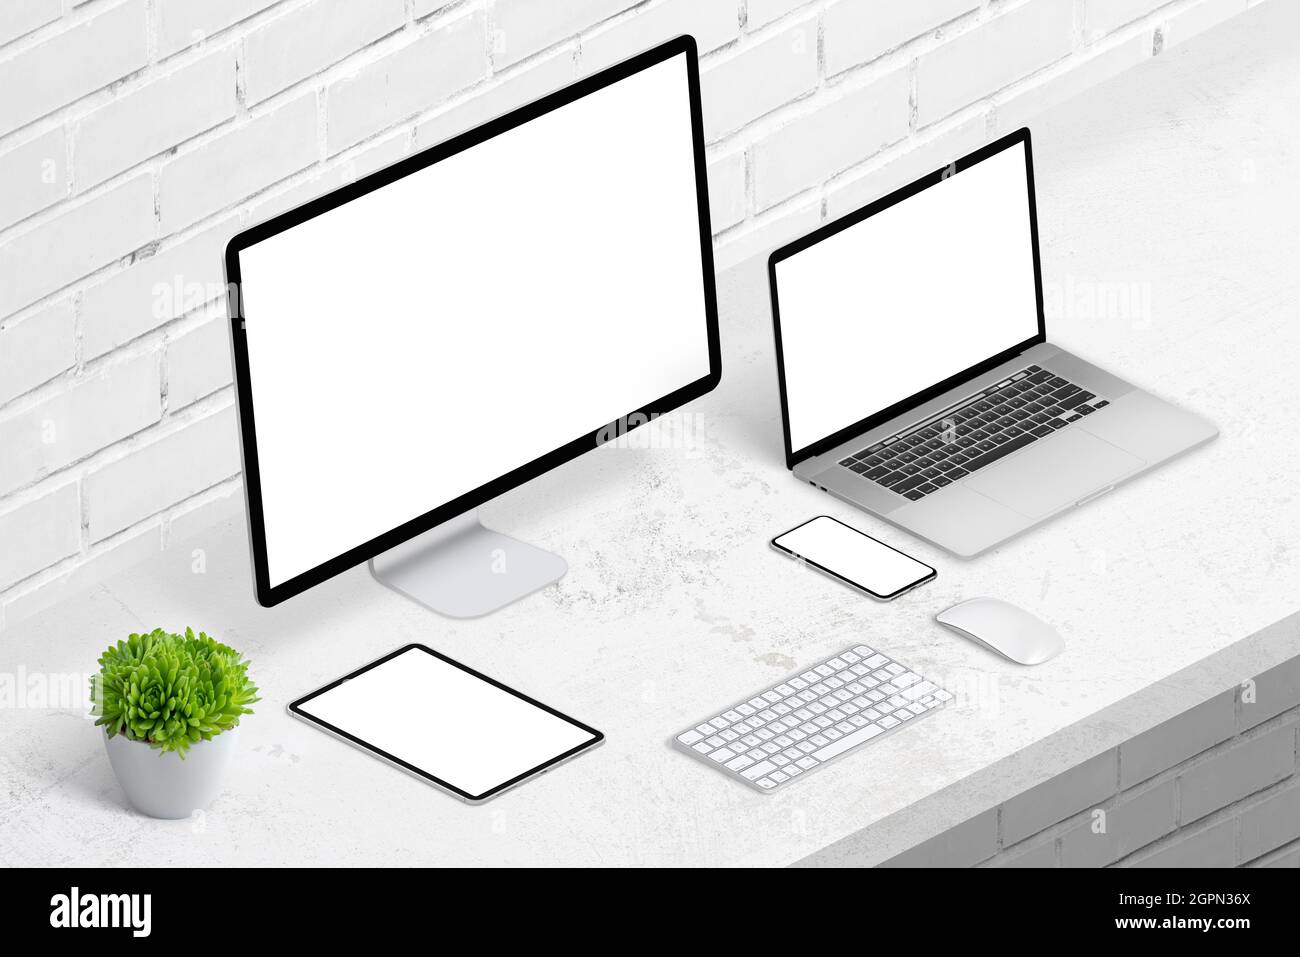 Devices on office desk for responsive web design promotion. Computer display, laptop, tablet and smart phone with isolated screen for mockup Stock Photo